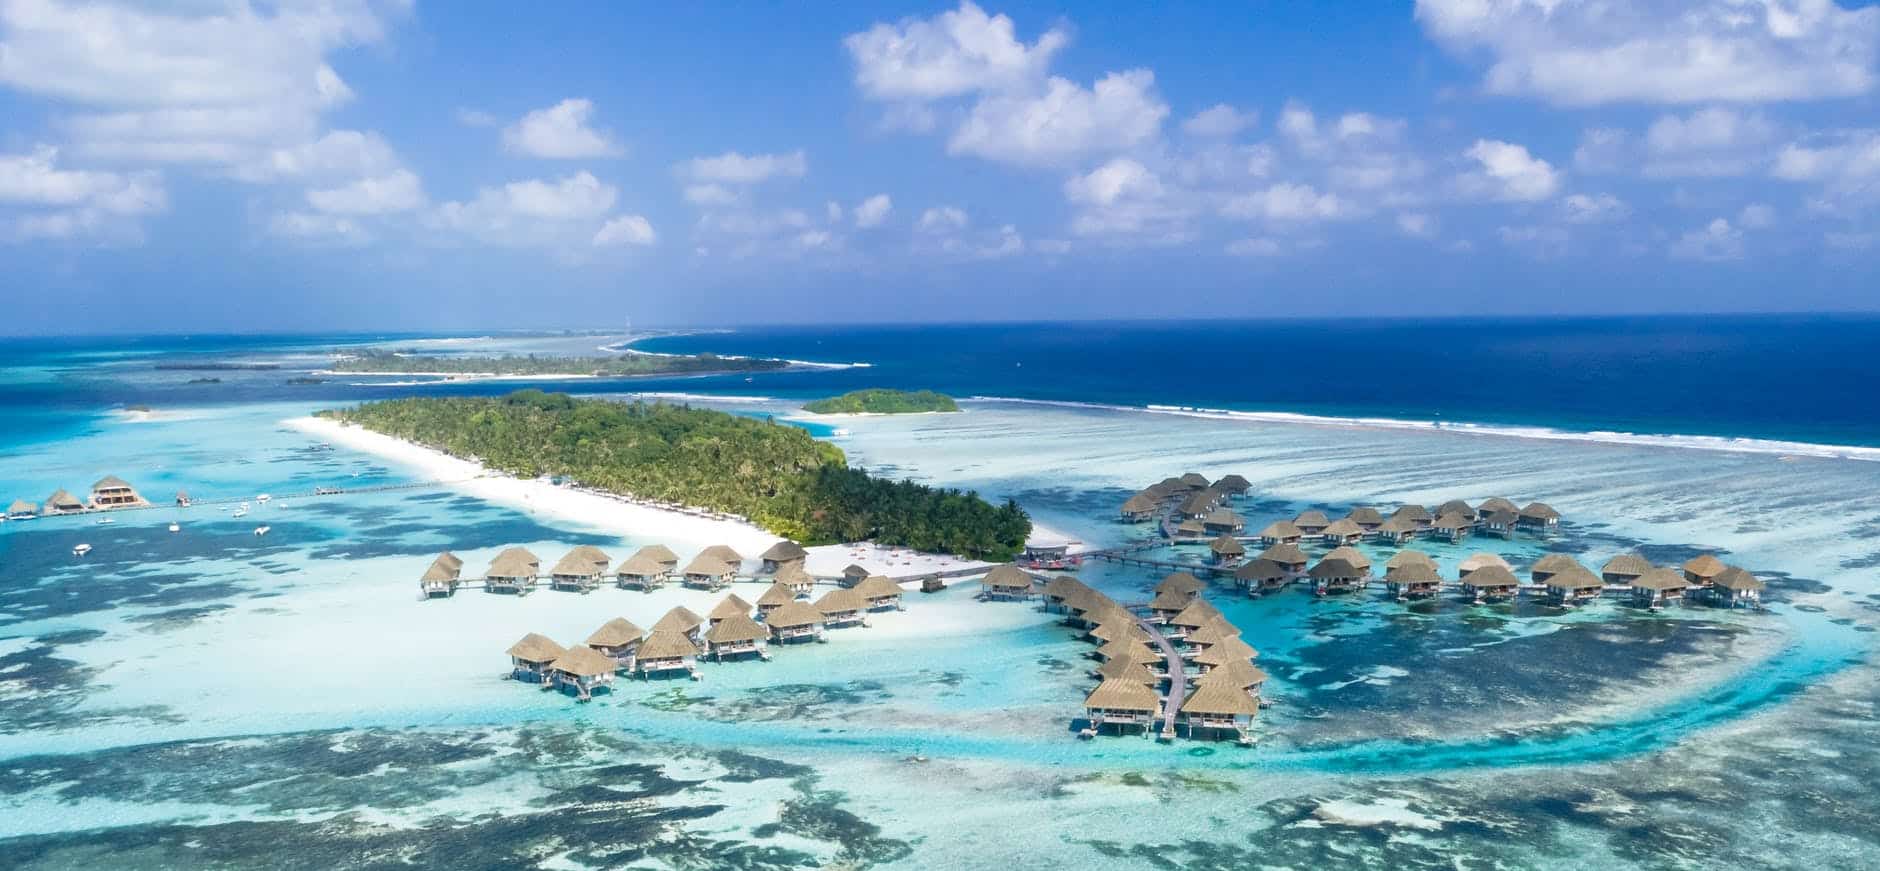 Maldives resort islands tips & experiences – a trip to paradise?